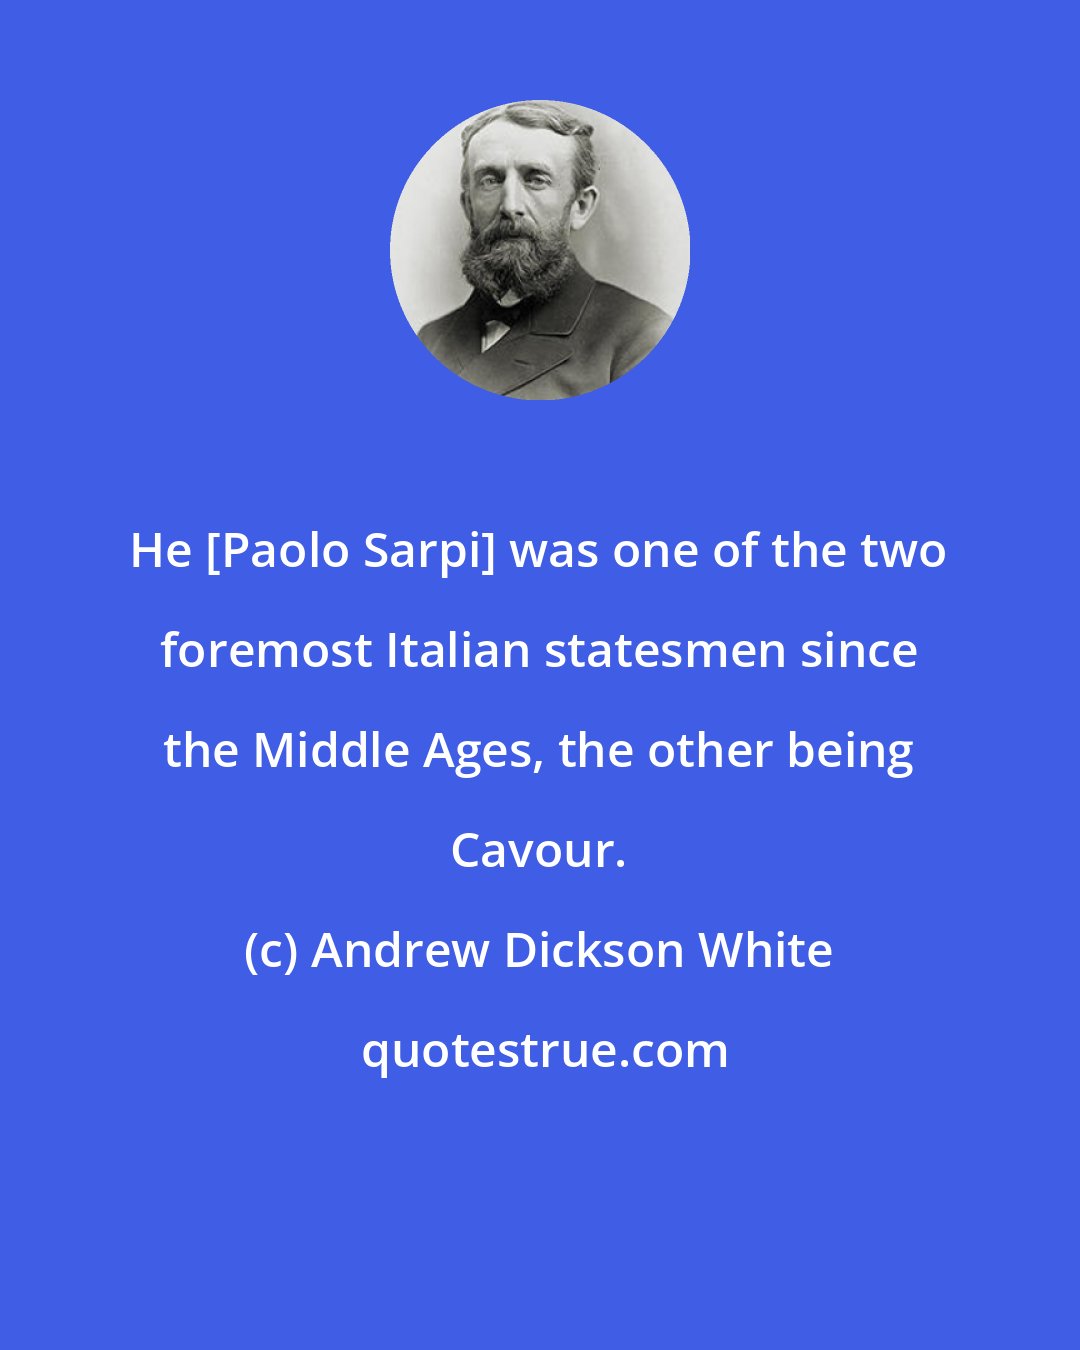 Andrew Dickson White: He [Paolo Sarpi] was one of the two foremost Italian statesmen since the Middle Ages, the other being Cavour.